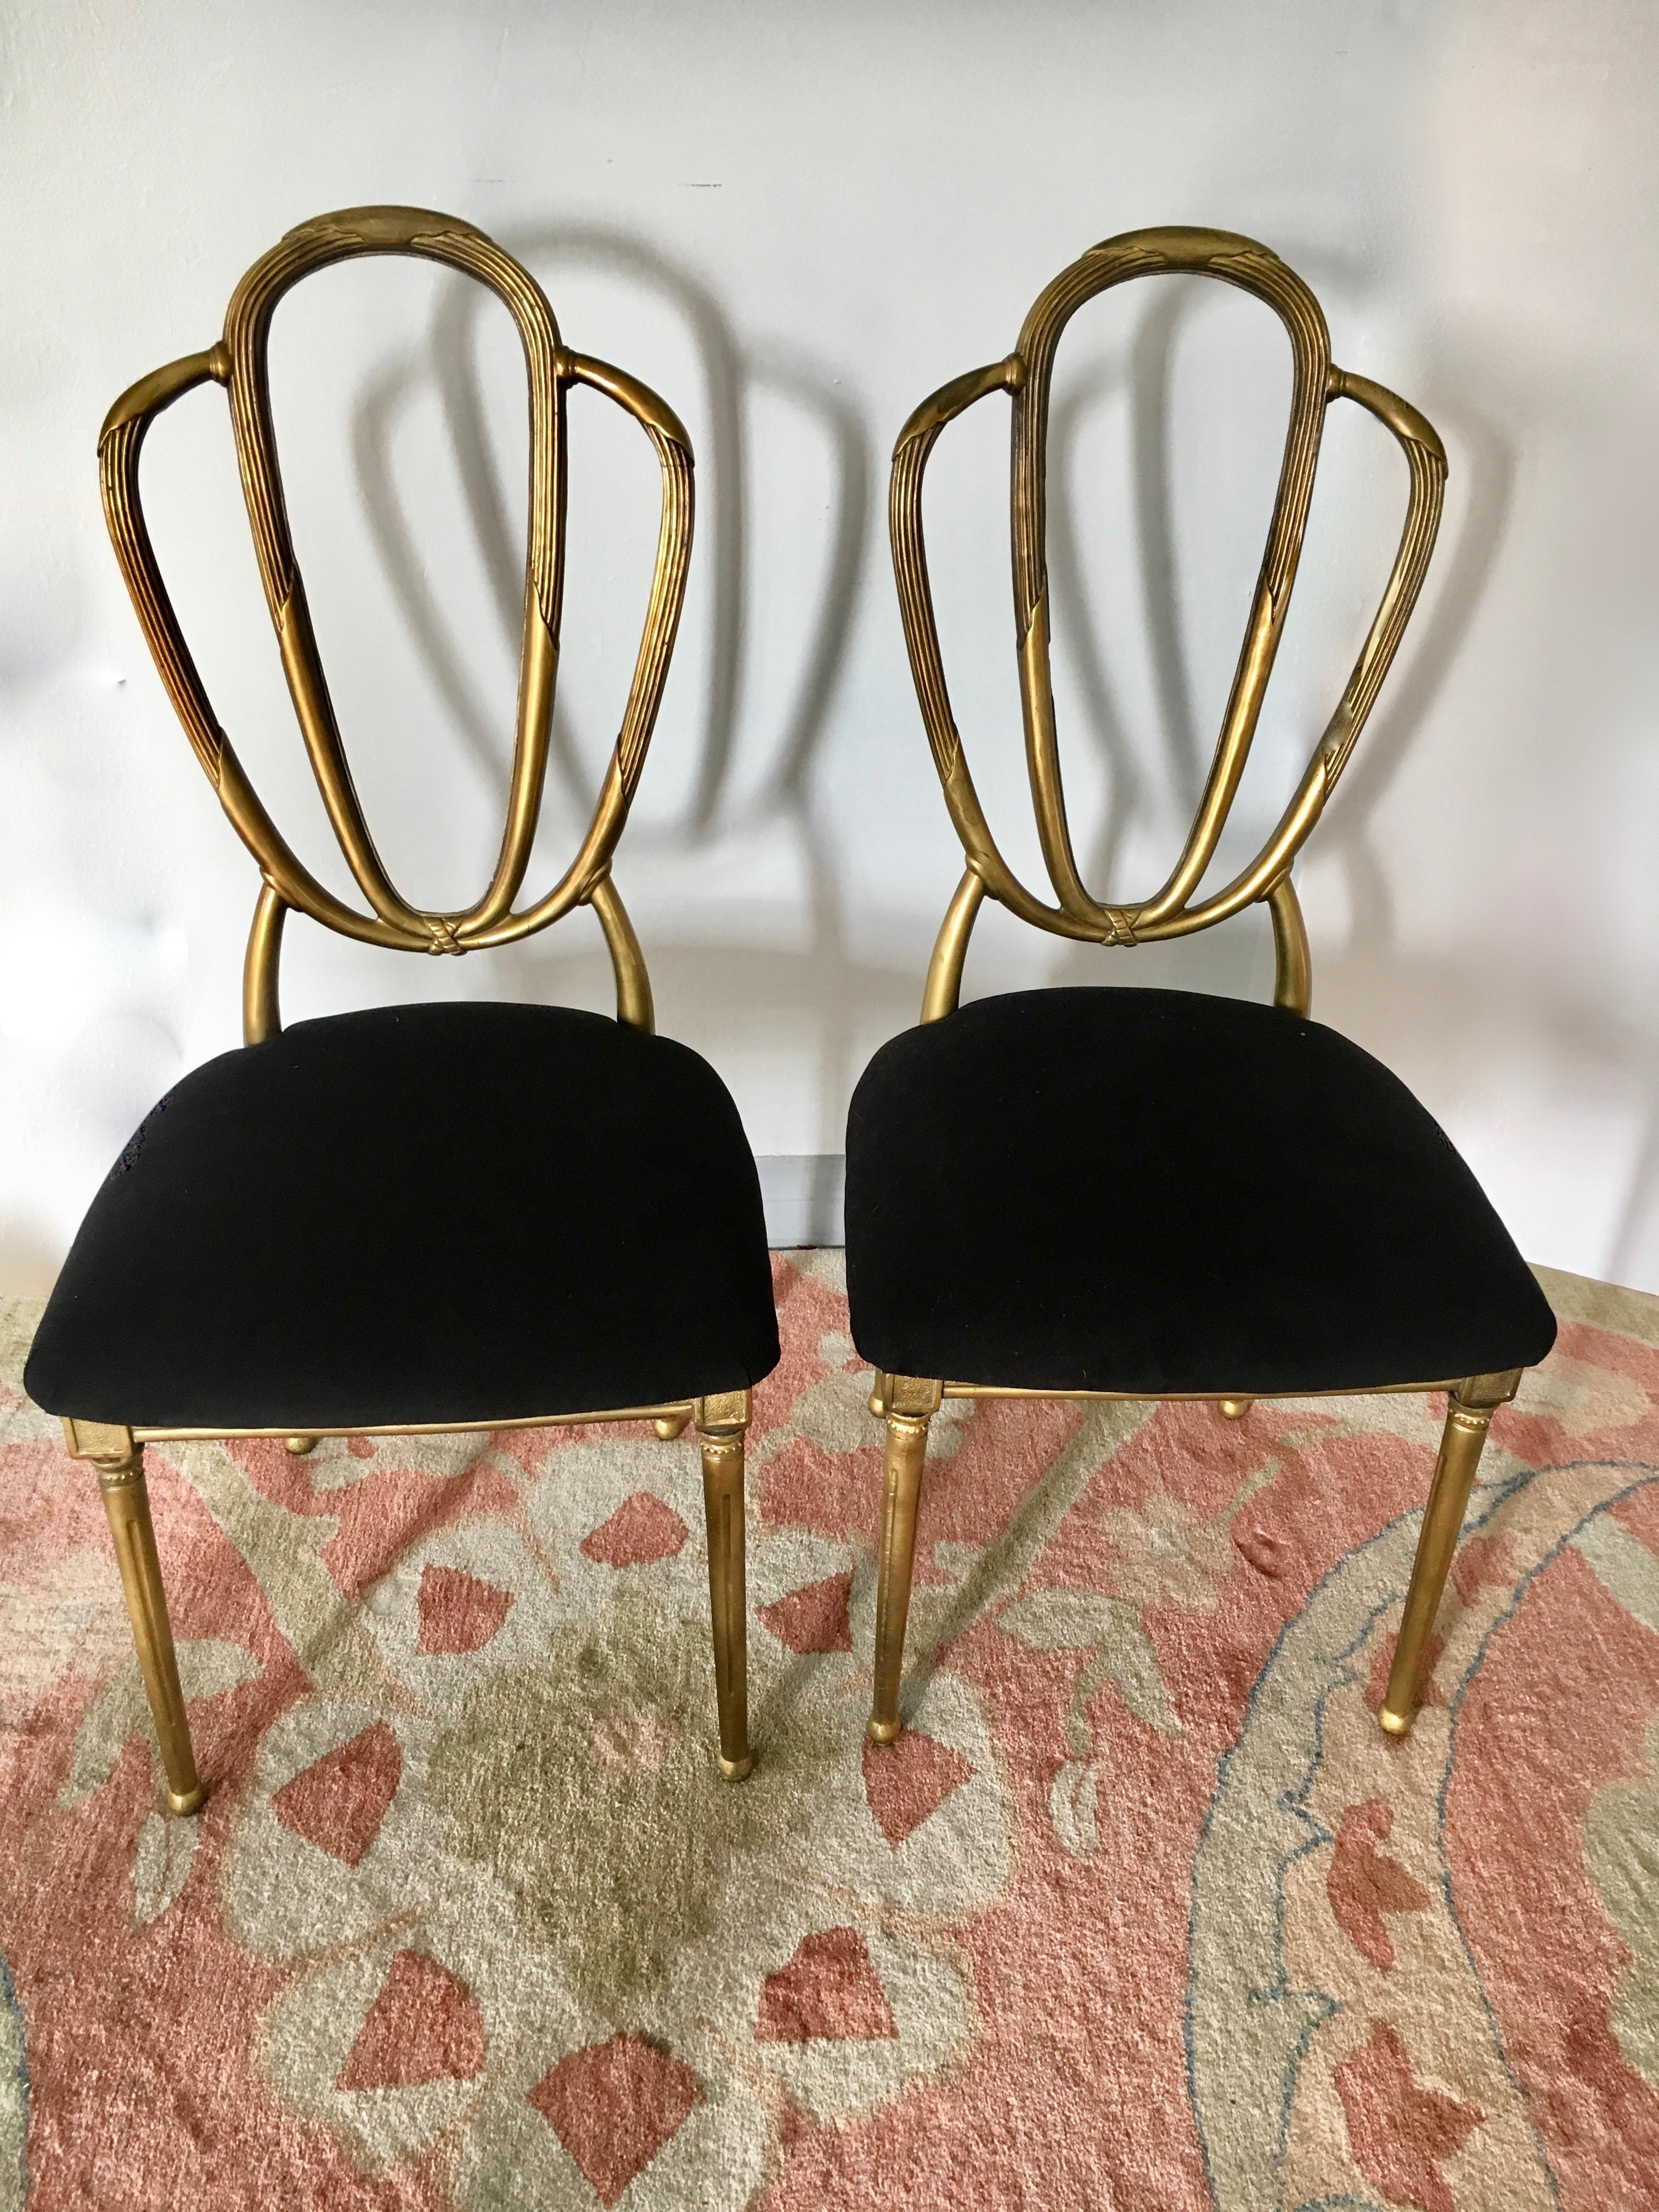 Four midcentury gold dining chairs.